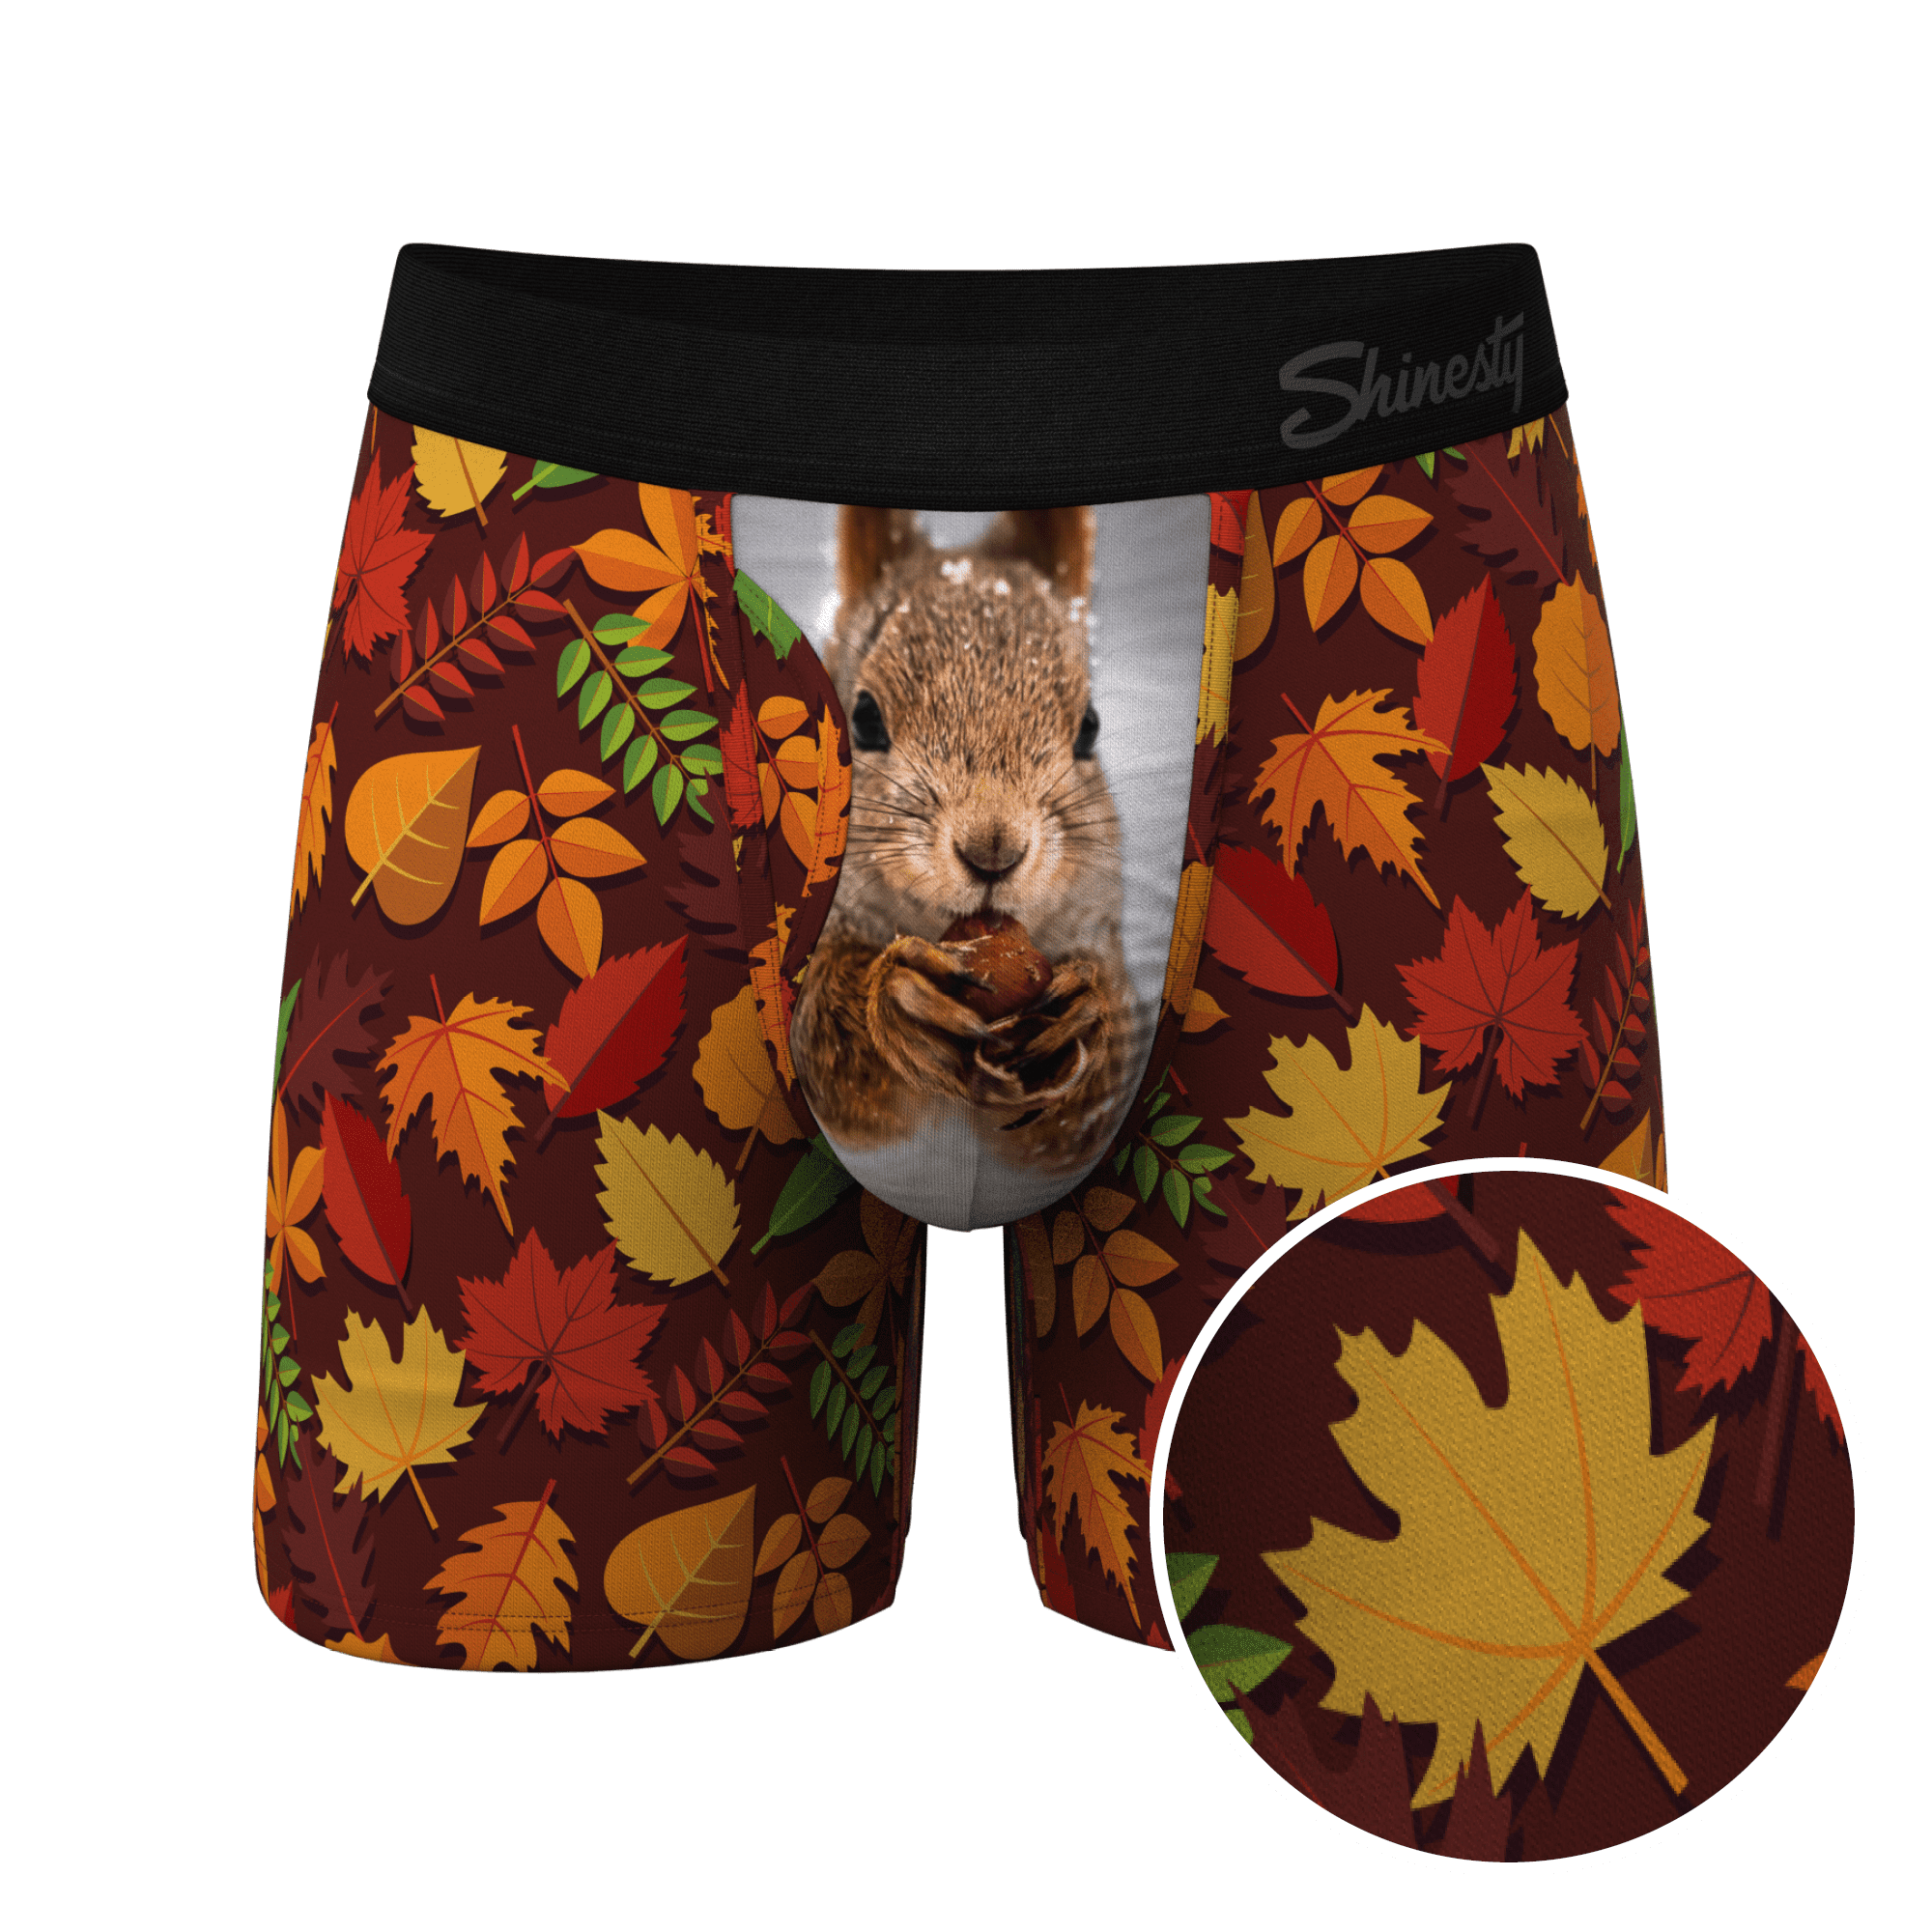 The Acorn Hoard - Shinesty Squirrel Ball Hammock Pouch Underwear With Fly 4X